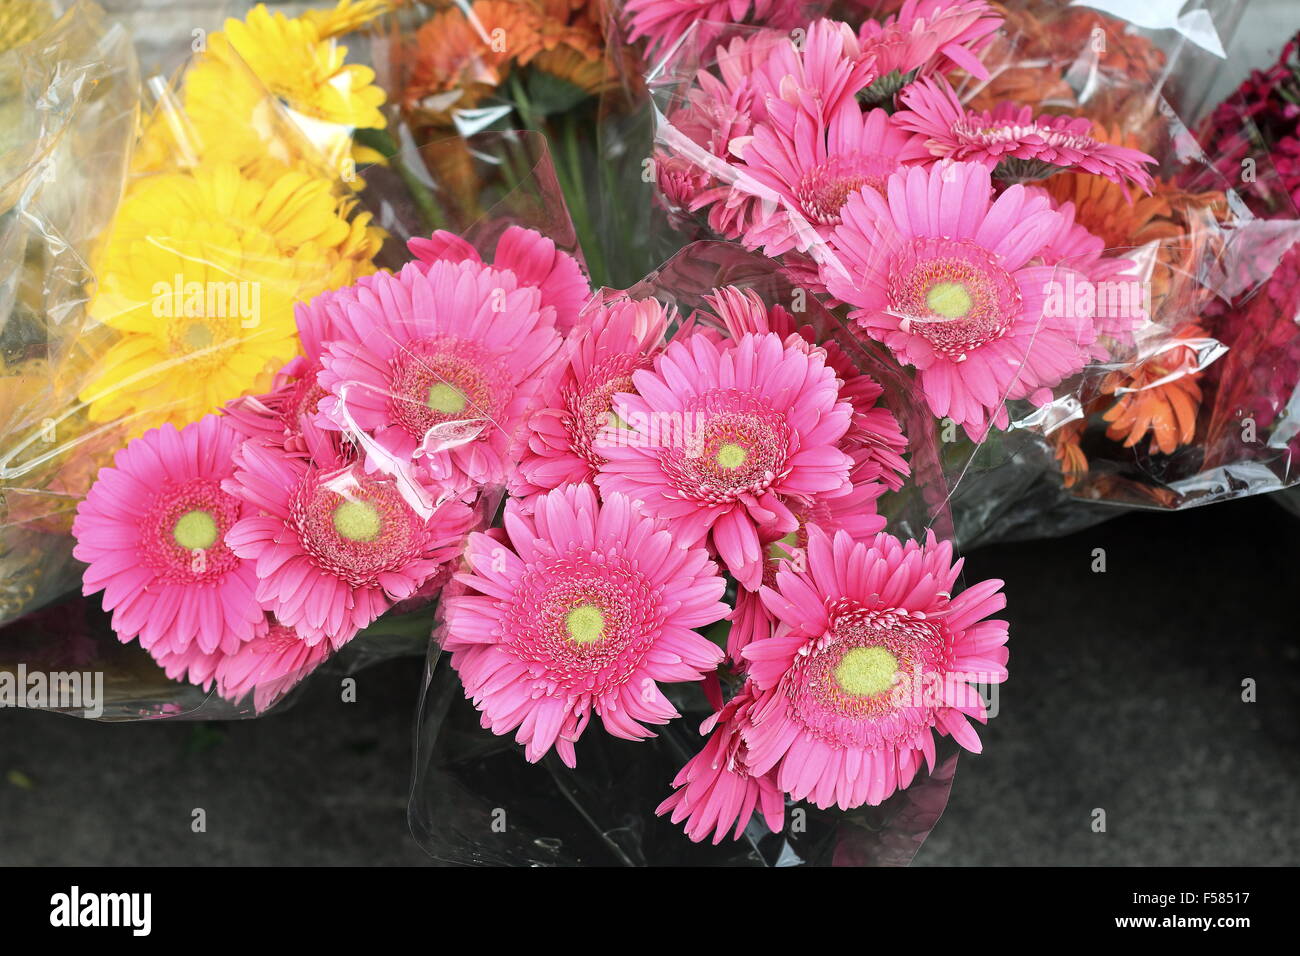 Pink Gerbera Daisies flowers for sales at a market Stock Photo